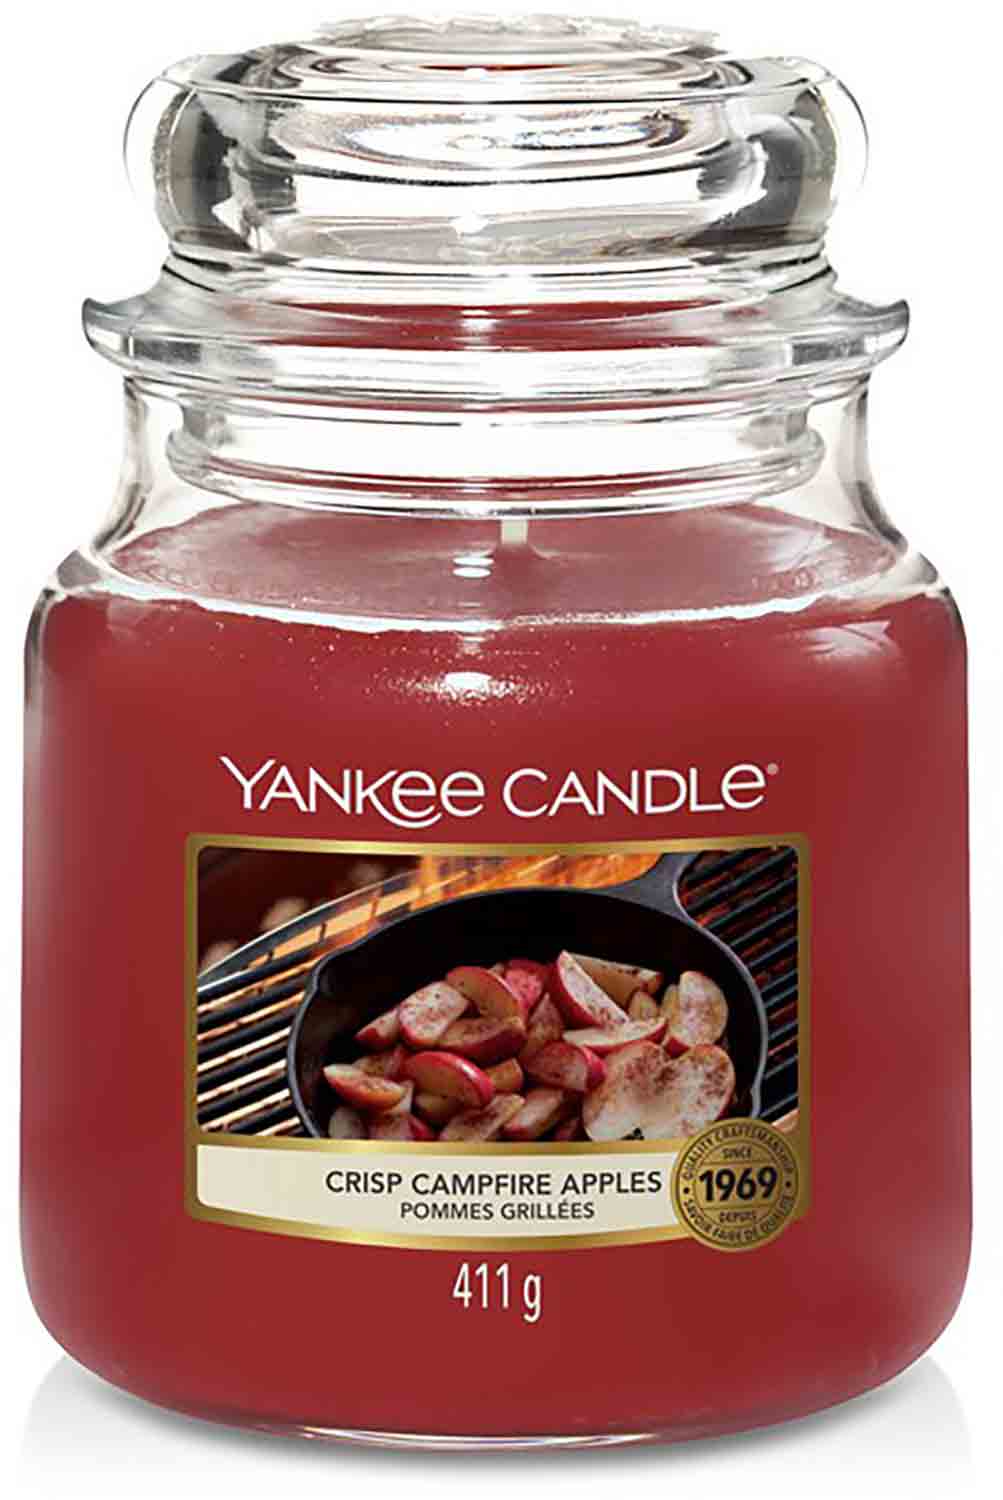 Yankee Candle Crisp Campfire Apples 411g Assorted